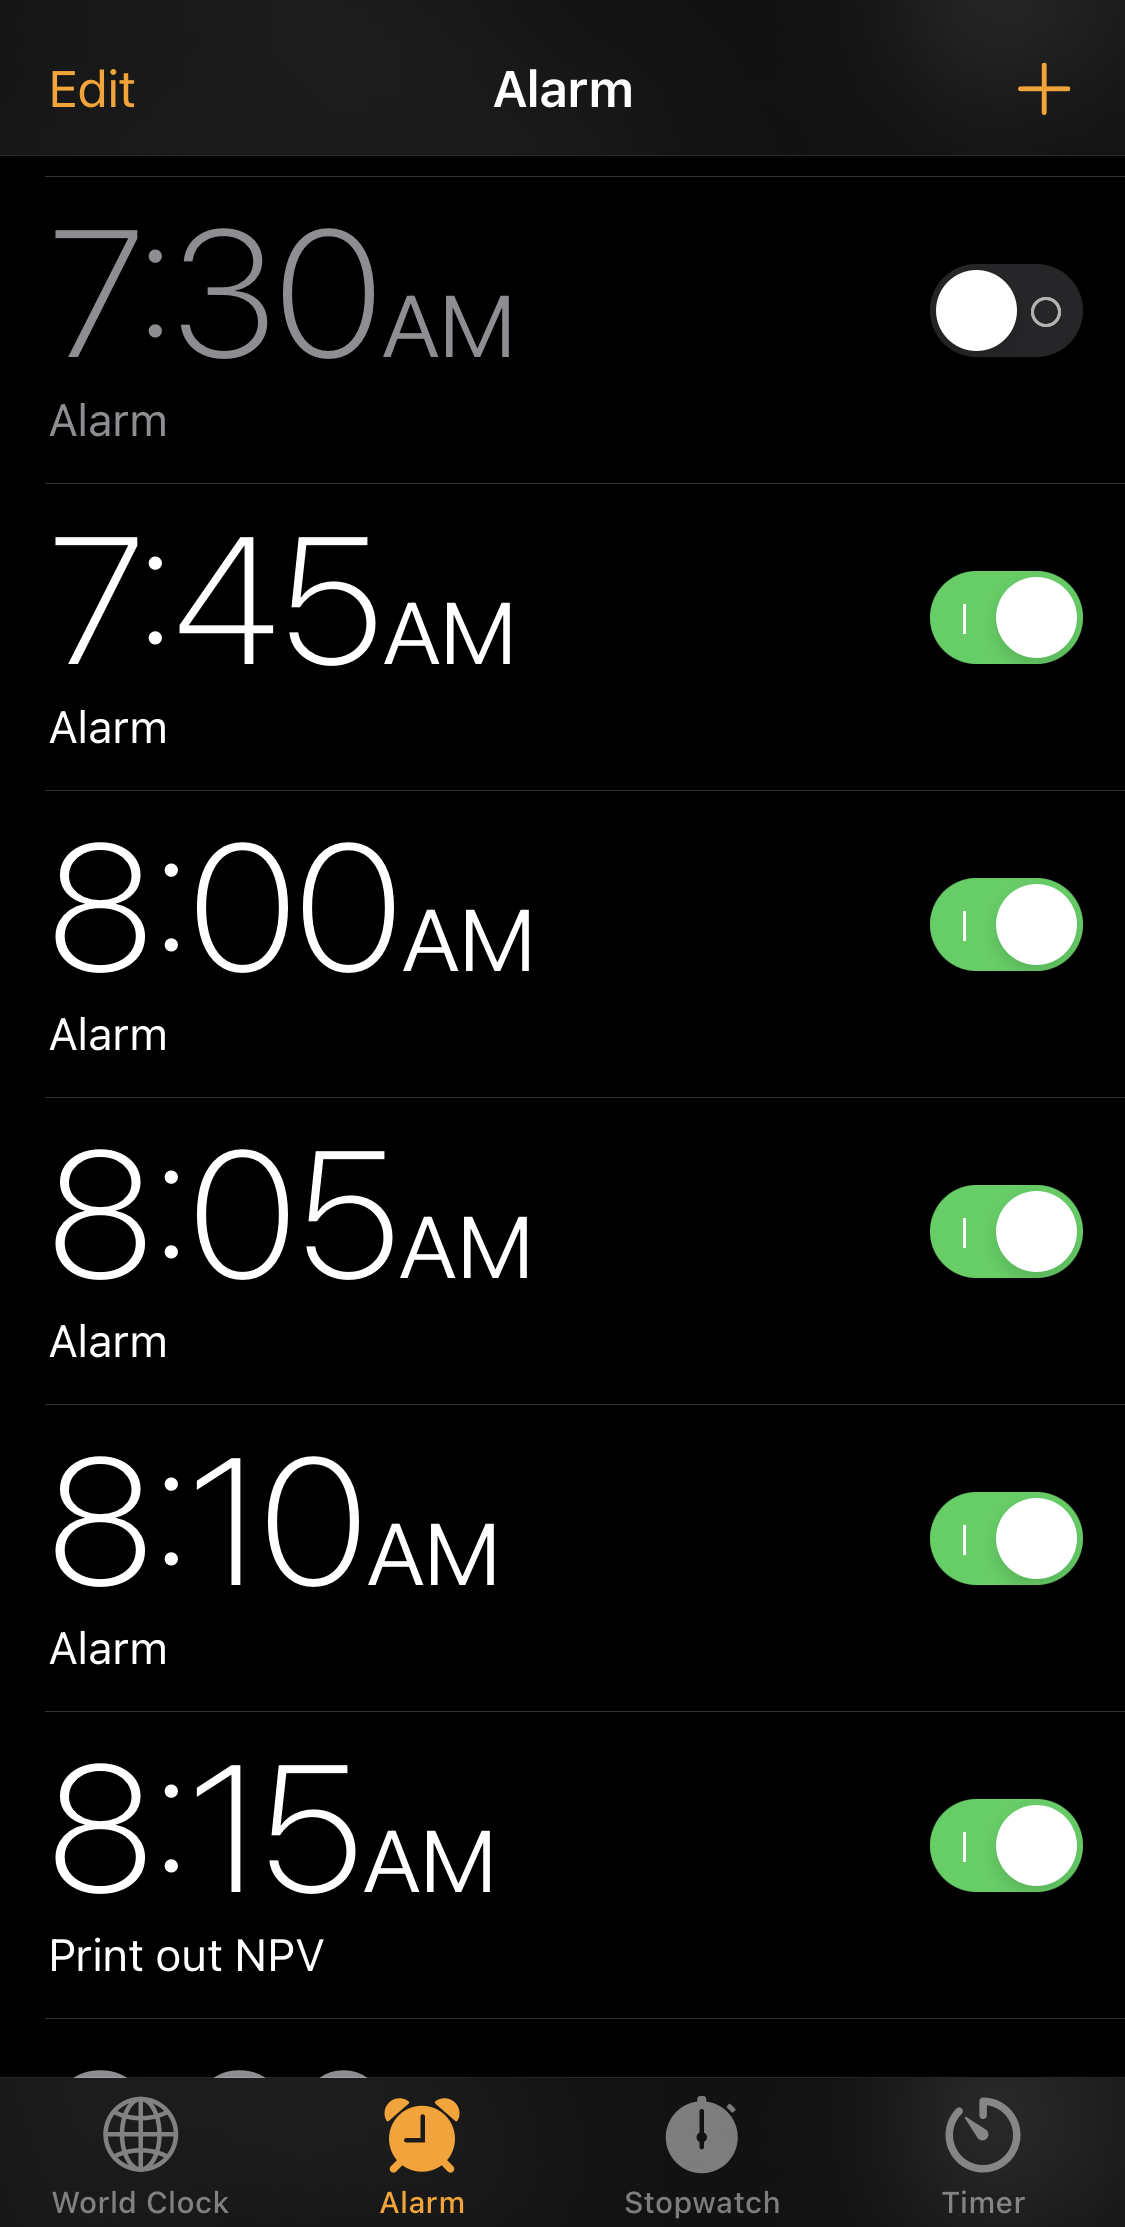 Lots of alarms to scroll through and old TODOs that I've left for
myself in the alarm names.